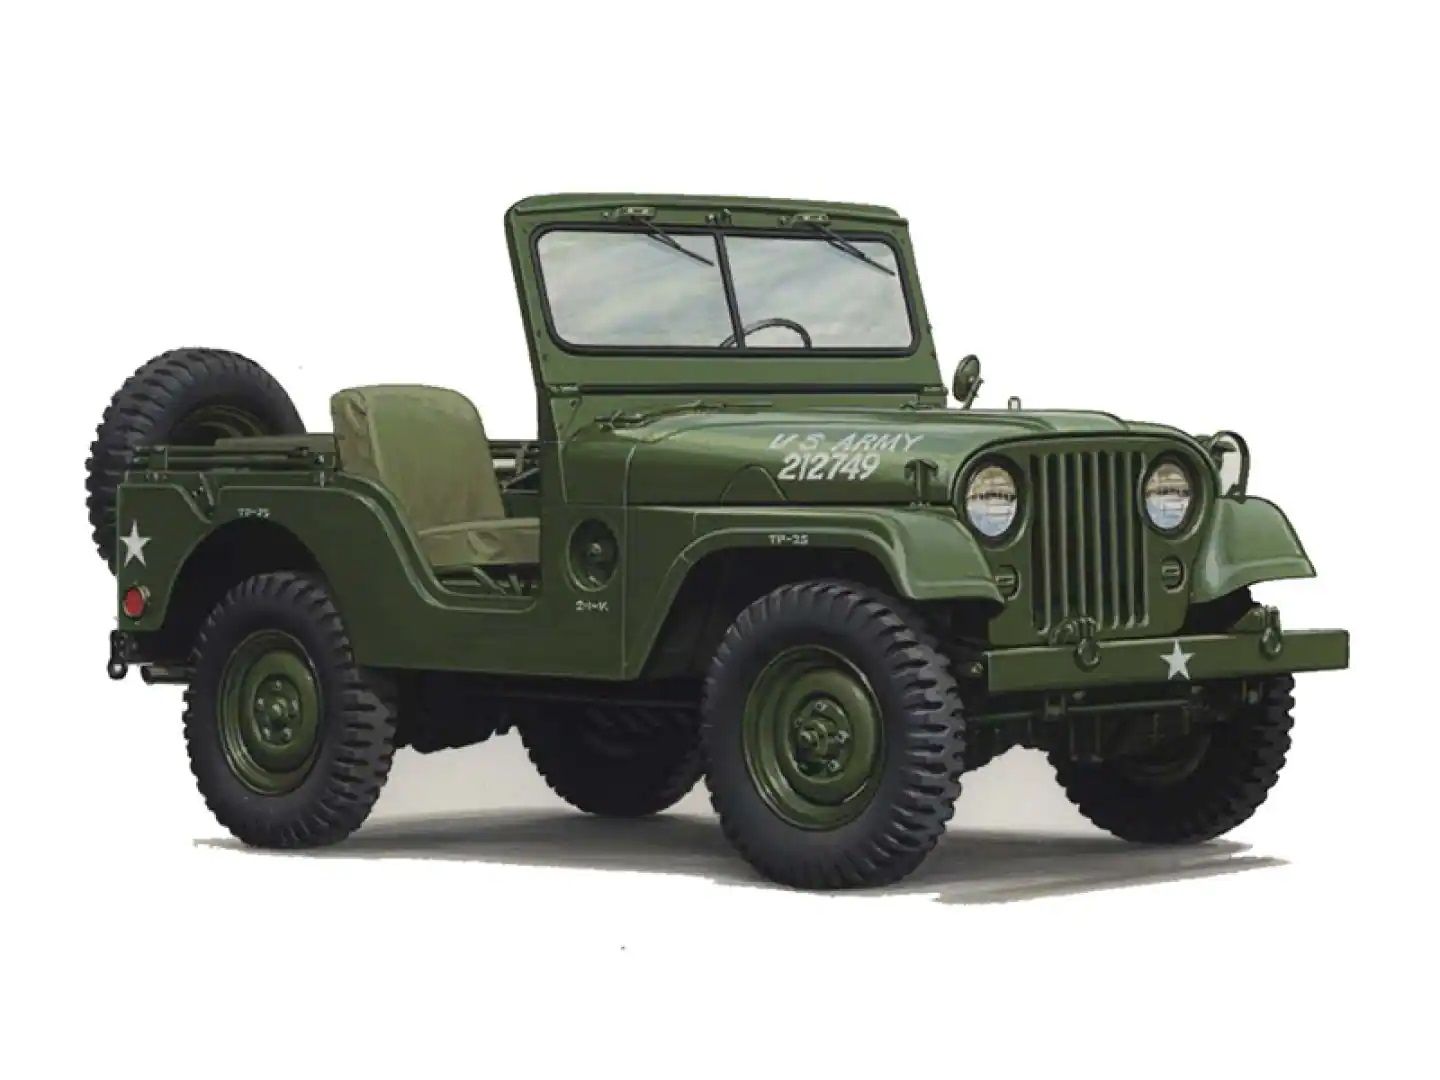 A parked military jeep from the 1950s